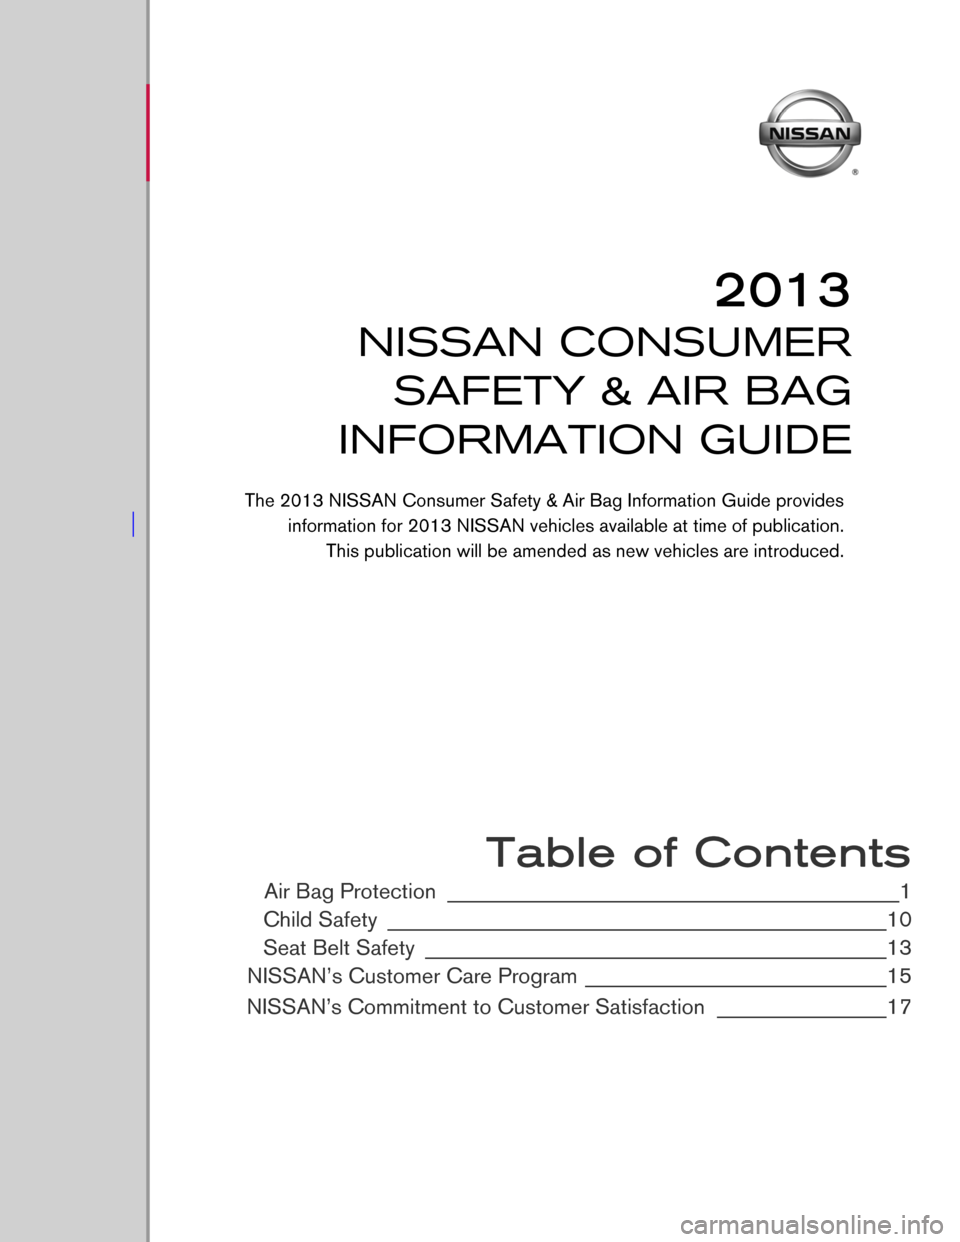 NISSAN GT-R 2013 R35 Consumer Safety Air Bag Information Guide  
 
 
 
 
 
 
 
 
 
 
 
 
 
 
 
 
 
 
 
 
 
 
 Table of Contents
Air Bag Protection ________________________________________________1
Child Safety
 ____________________________________________________